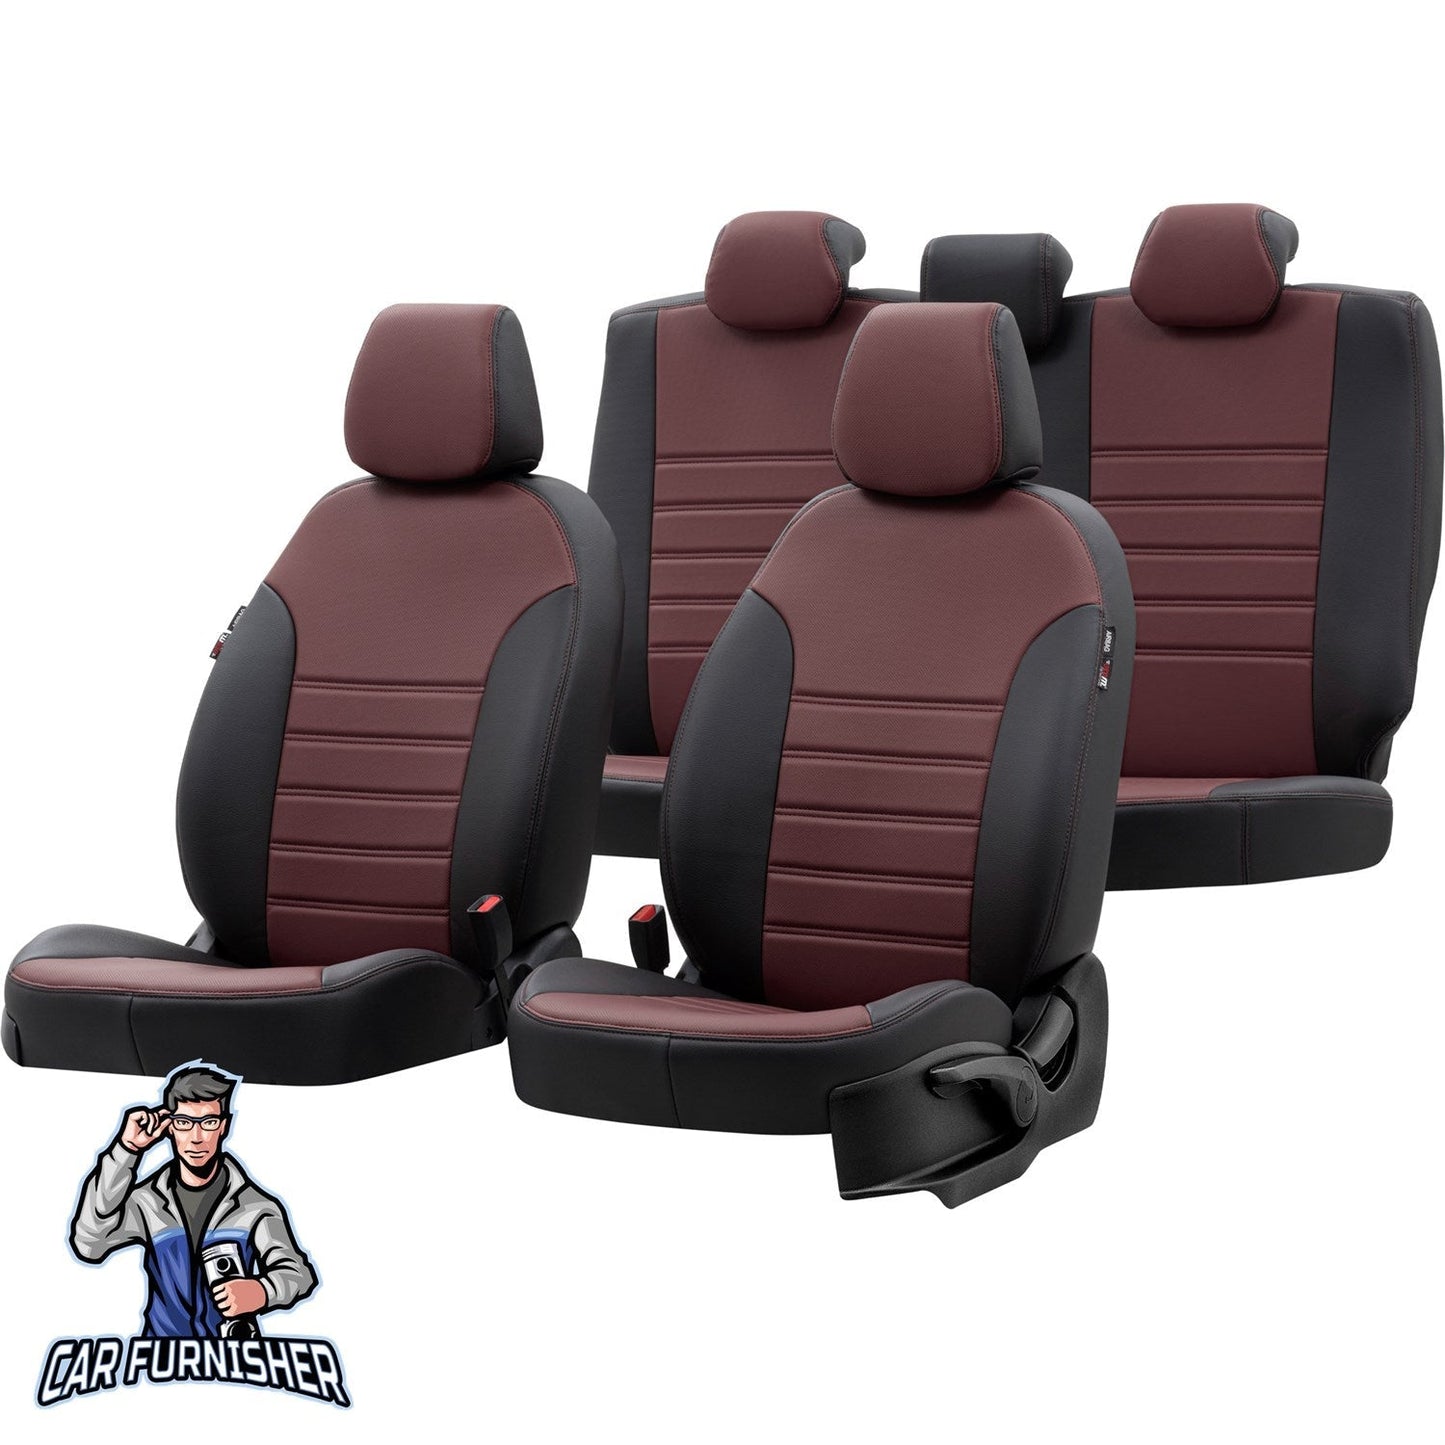 Peugeot Boxer Seat Covers Istanbul Leather Design Burgundy Leather